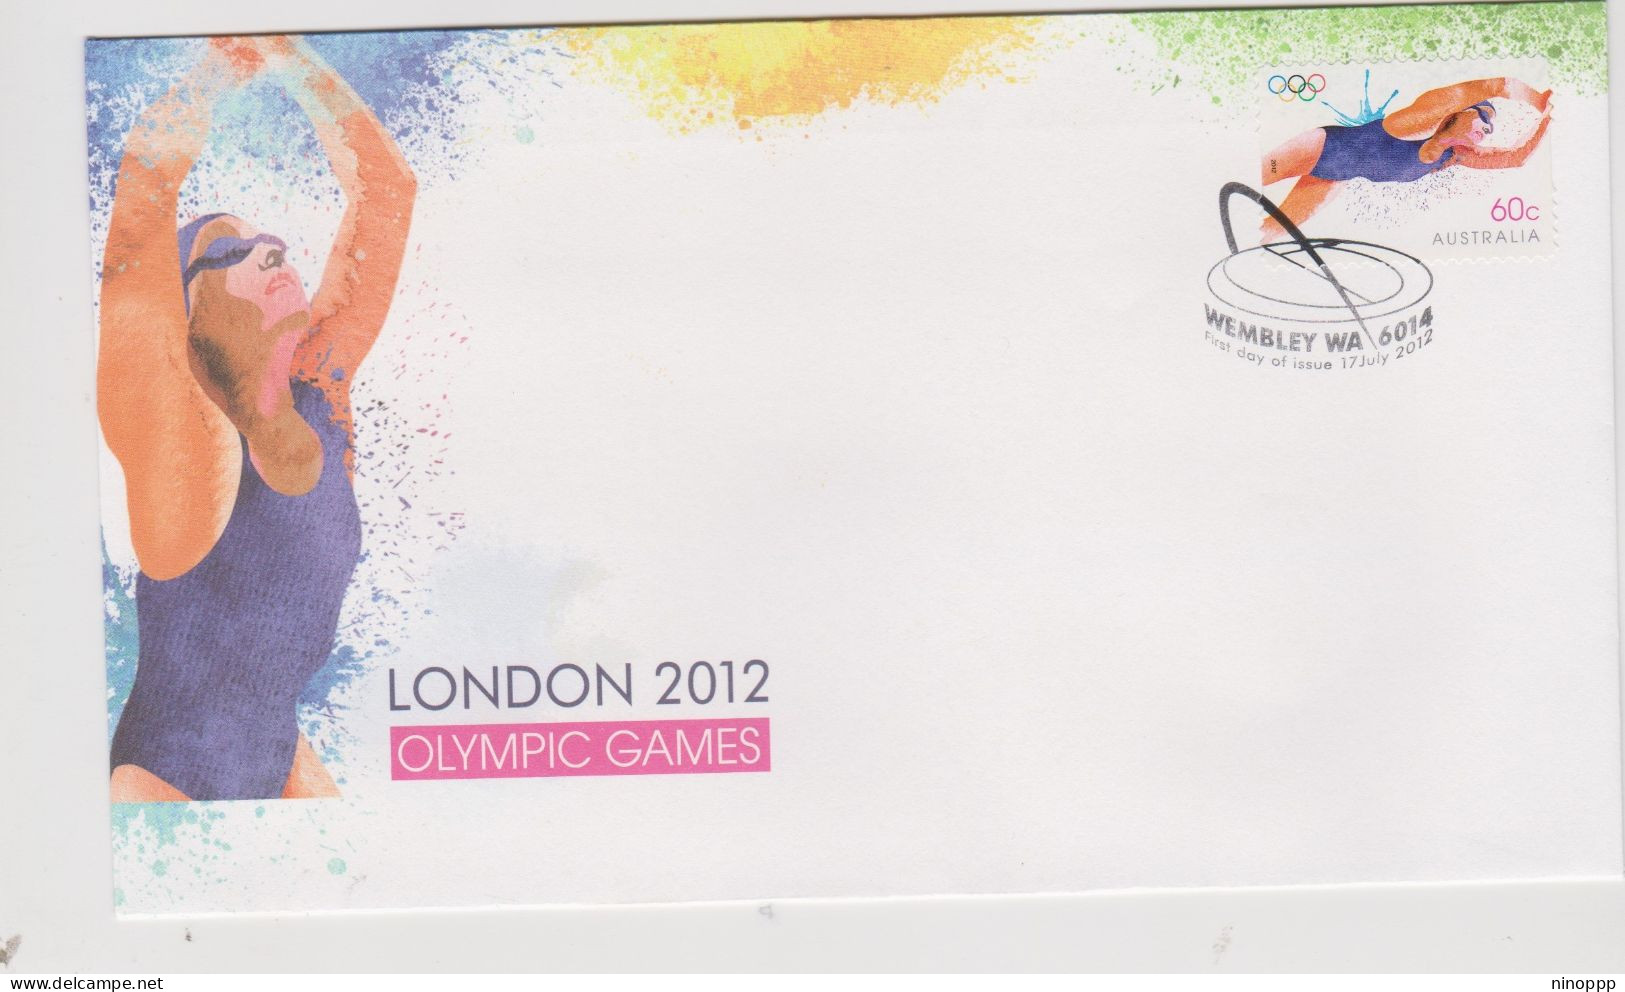 Australia 2012 London Olympic Games Self Adhesivel, First Day Cover - Poststempel